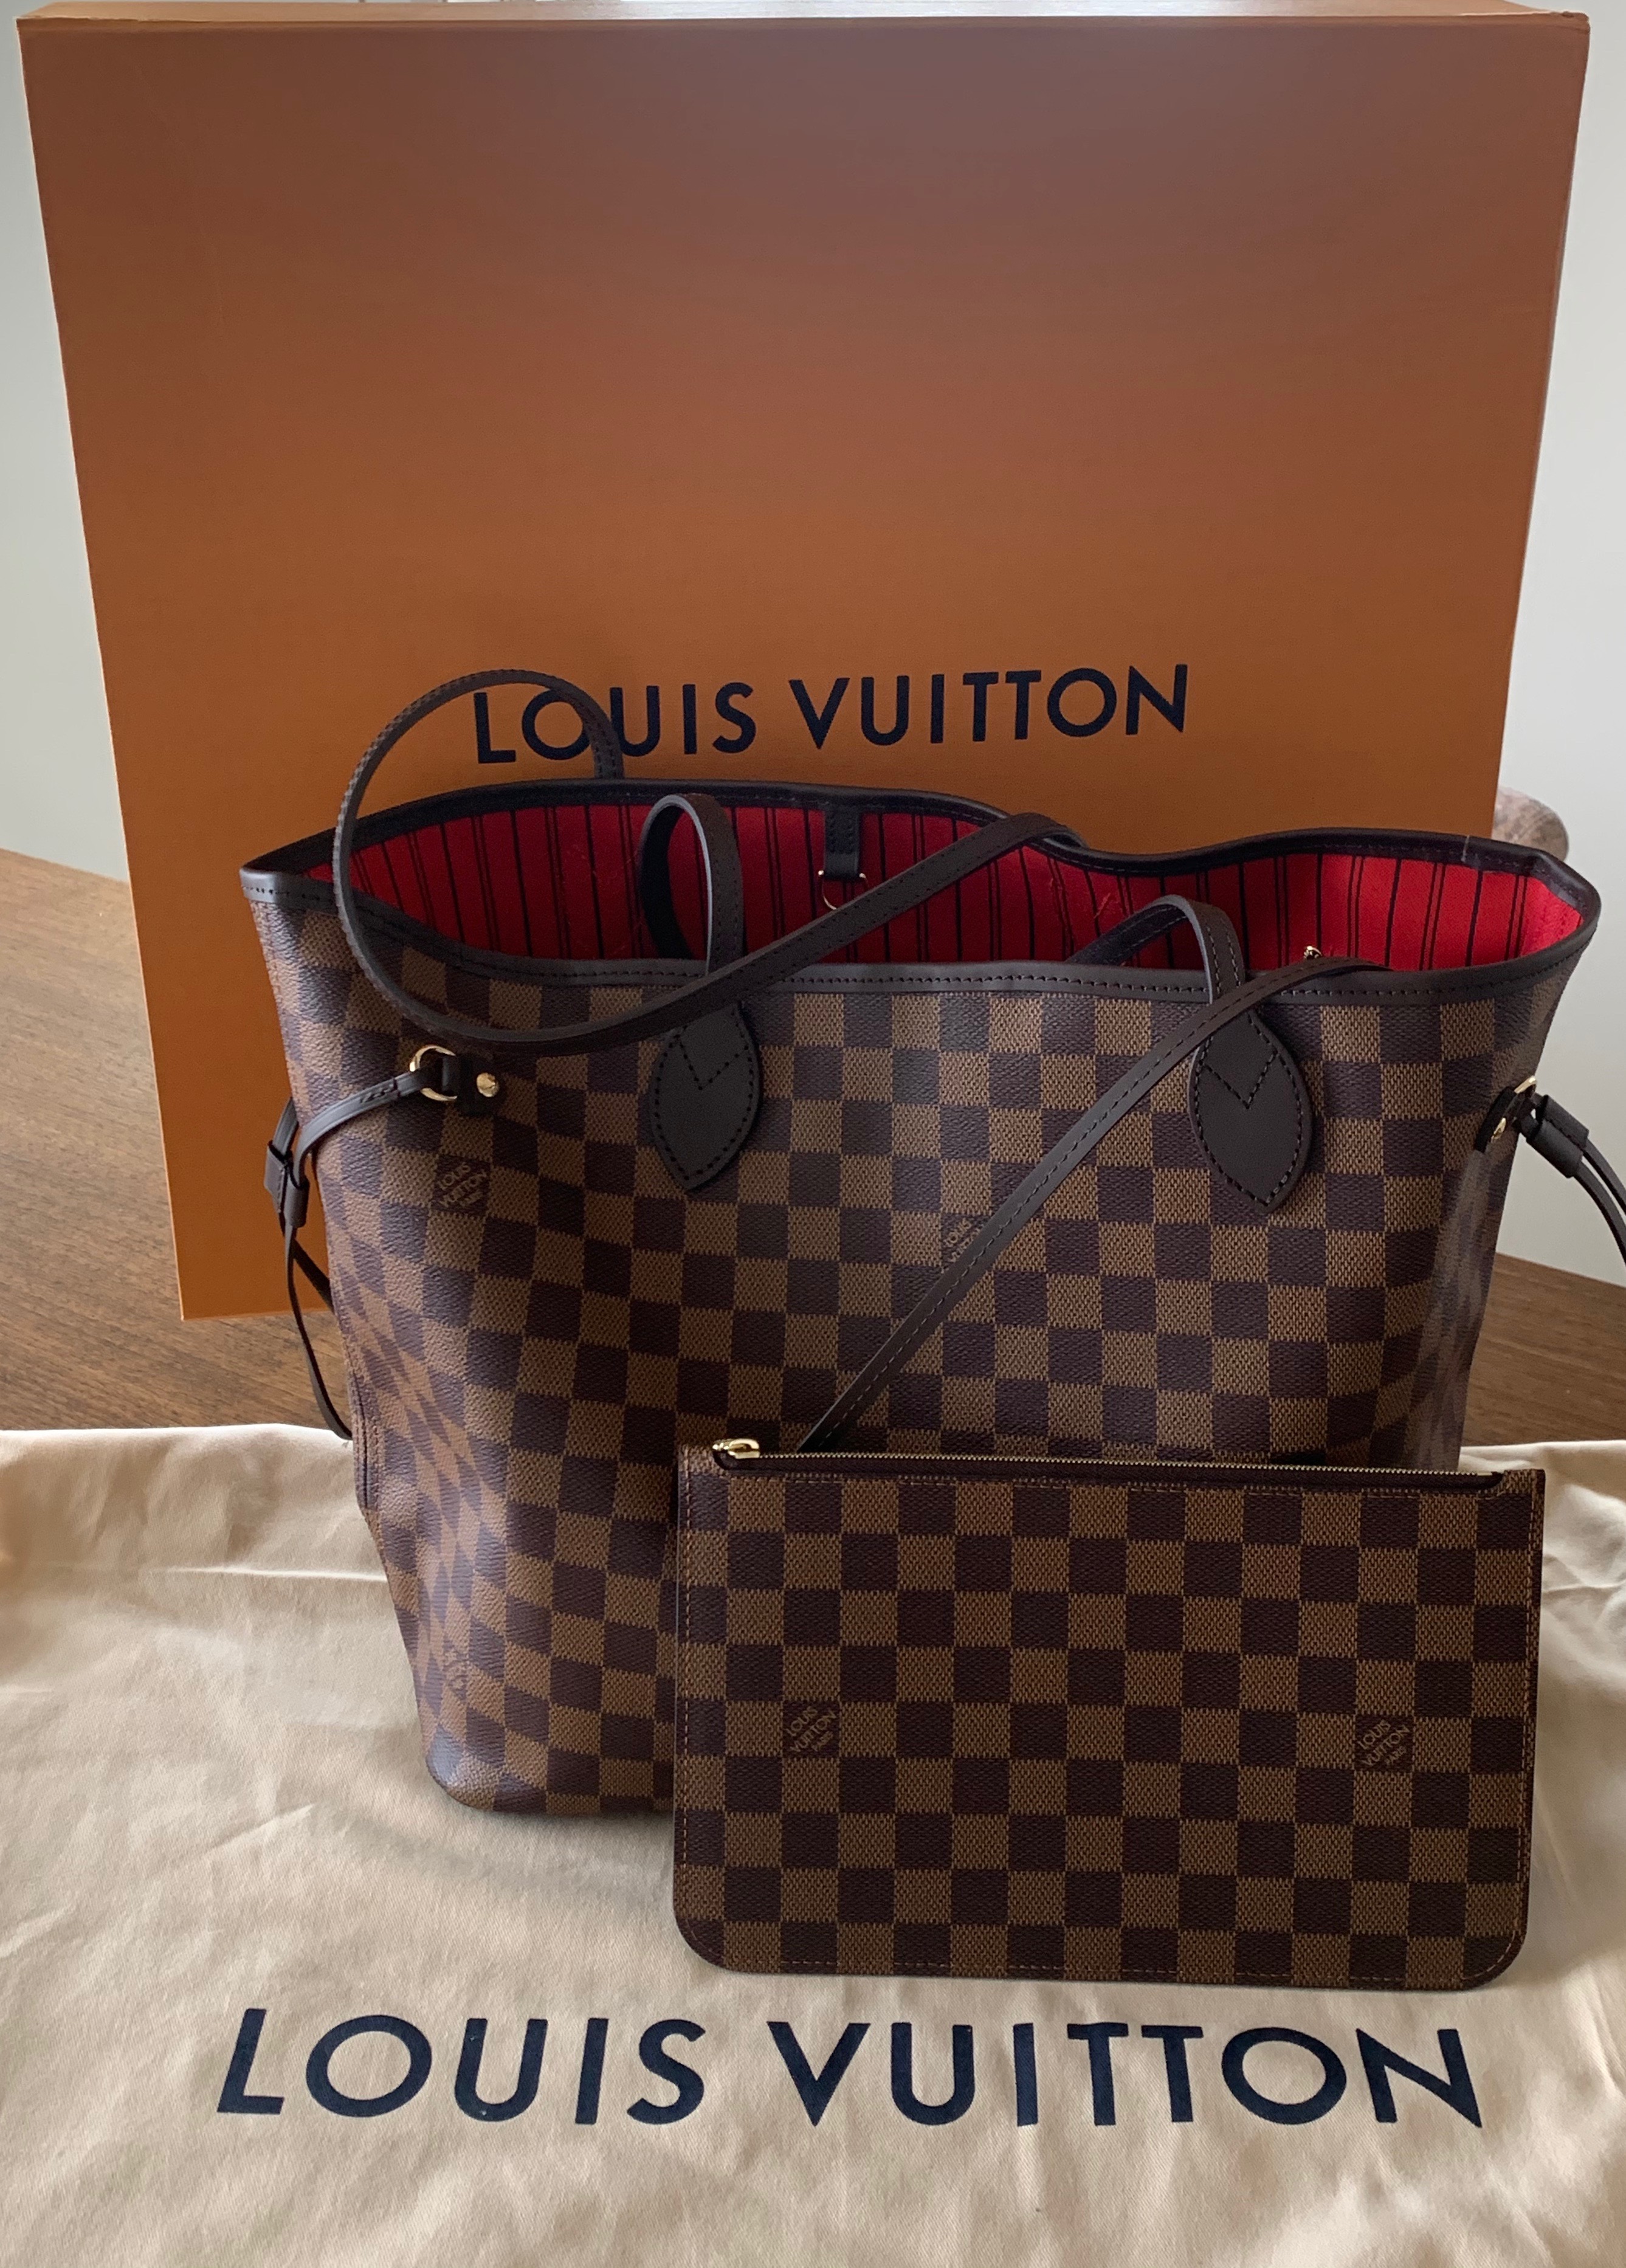 Silent Witness - Win a Louis Vuitton handbag valued at almost $1,400! Enter  our Bag a Criminal raffle at the link:  👜